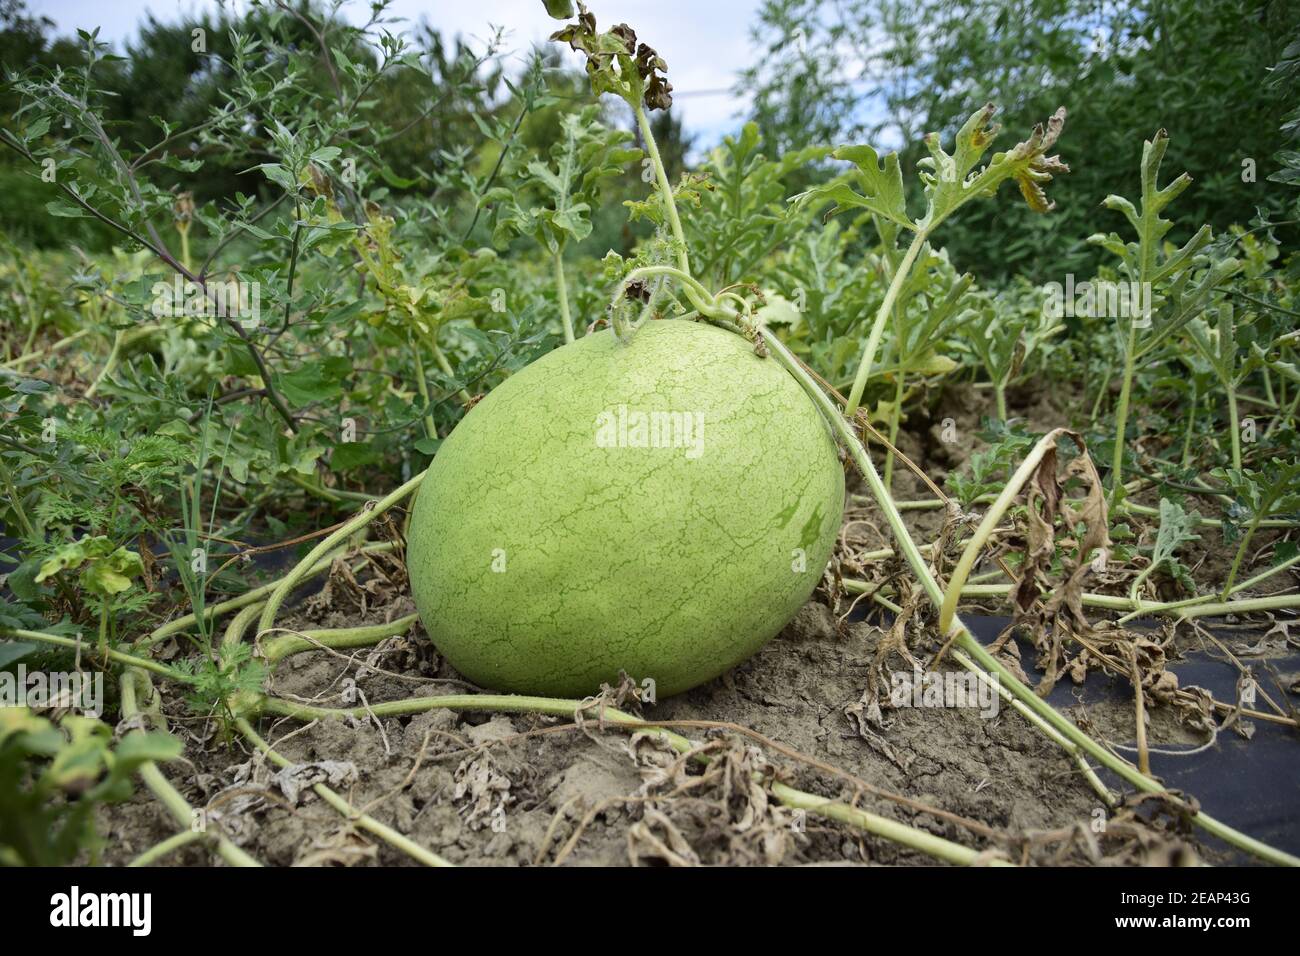 Watermelon with light and thick skin for good transportability Stock Photo